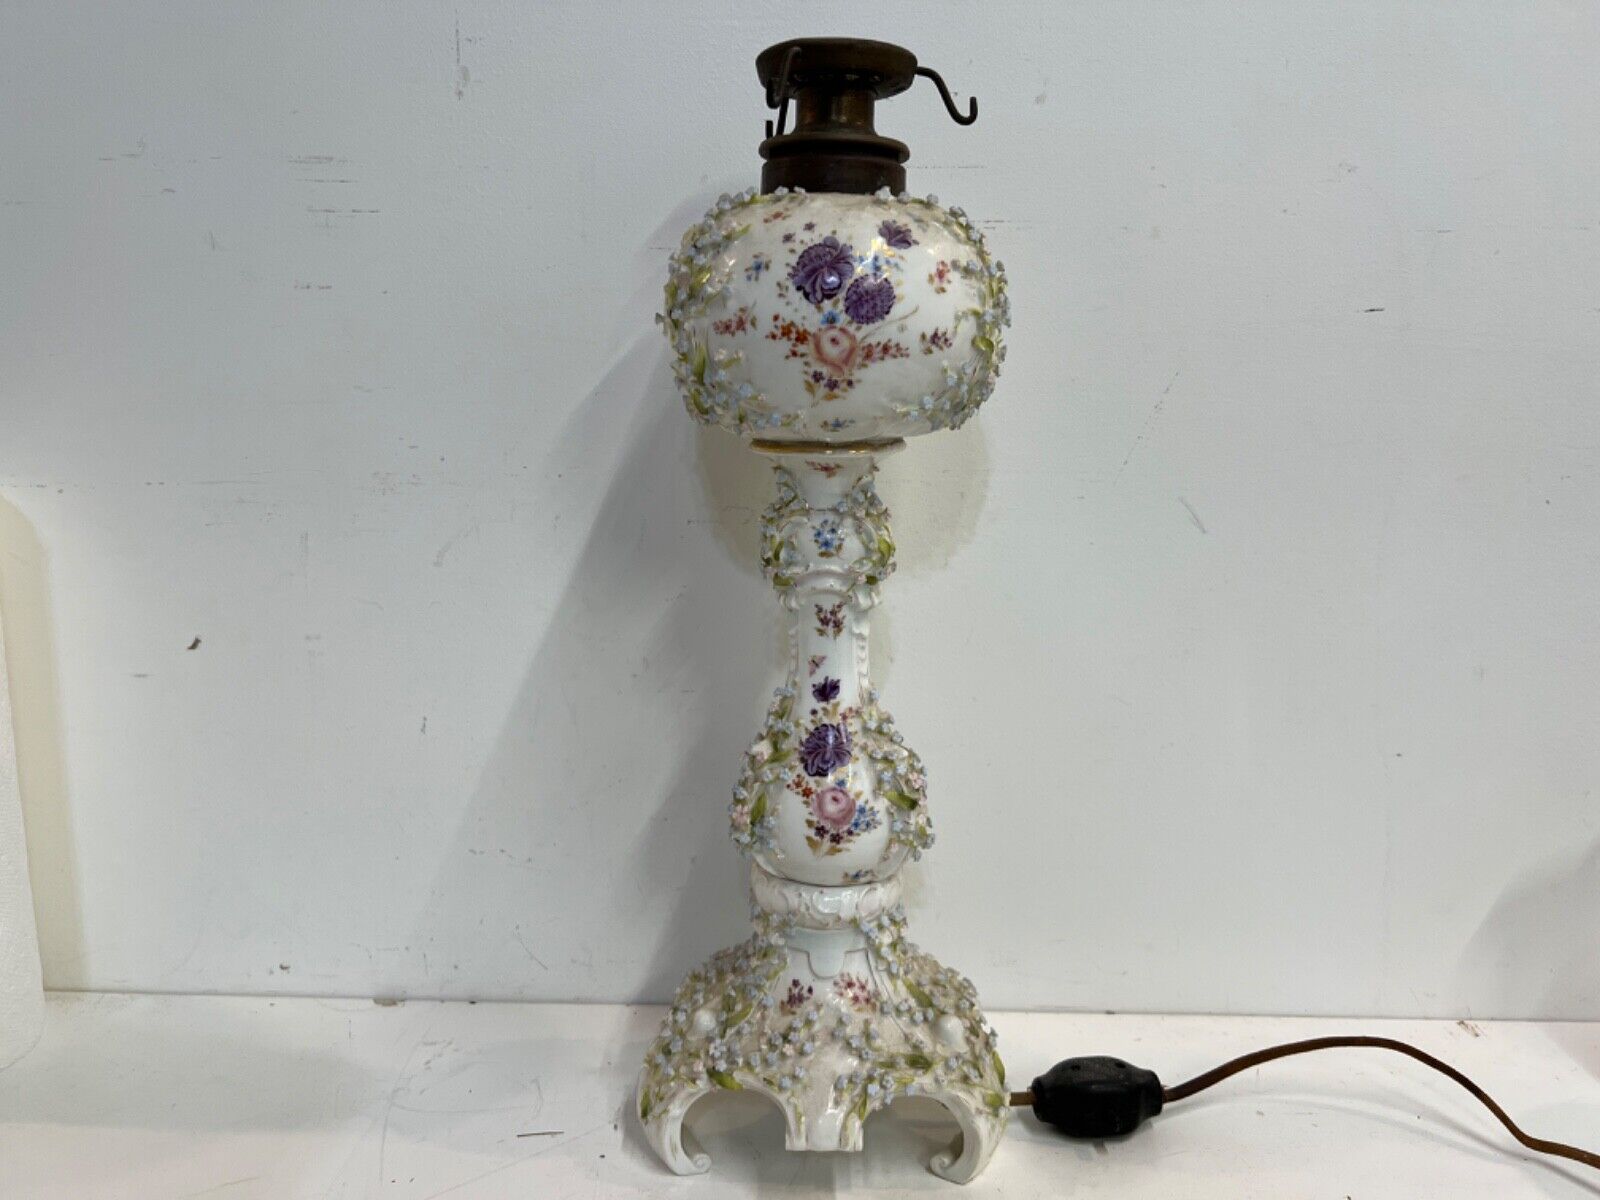 Antique Style of Dresden Porcelain Converted Lamp with Floral Decorations